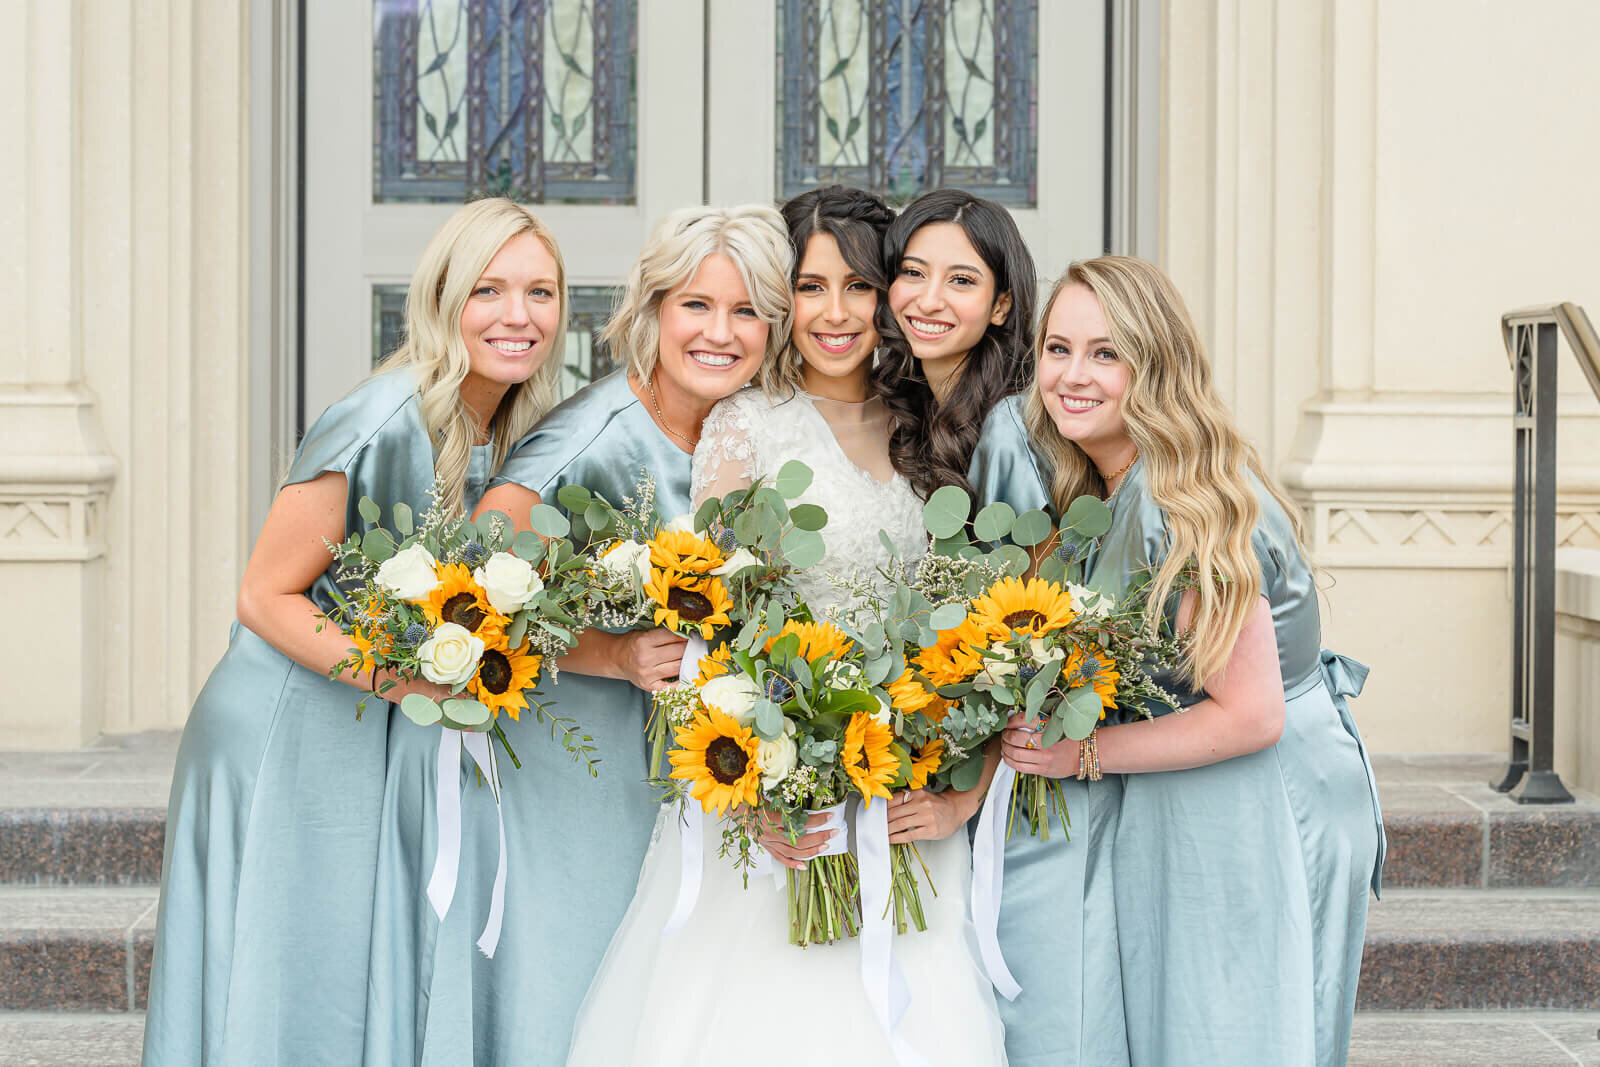 A spring bride and her bridesmaids wearing silky light blue dresses holding bouquets of sunflowers. Captured outside of the Payson Temple in May